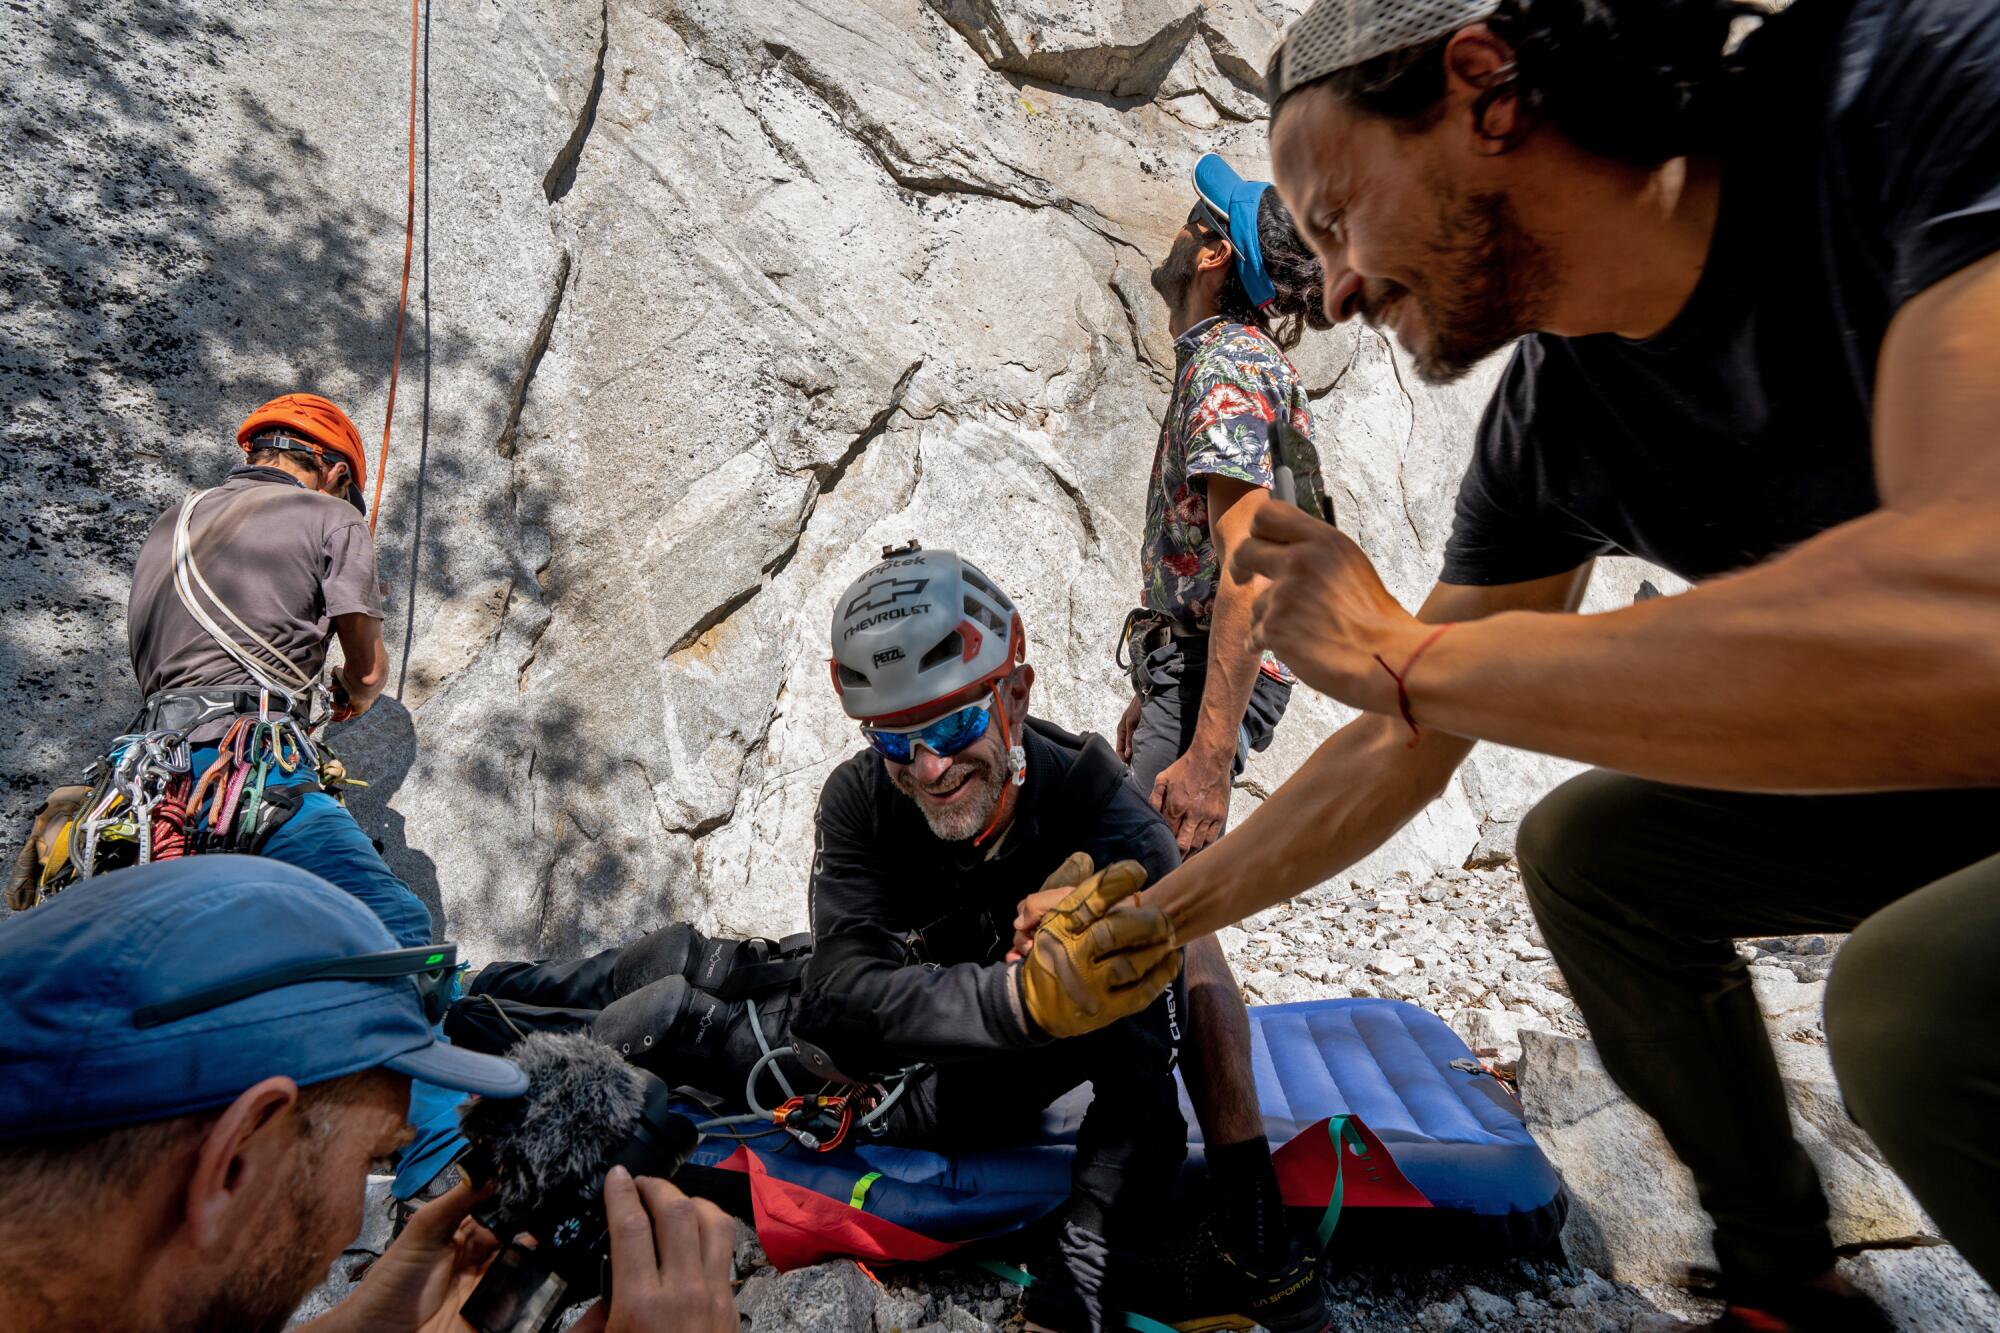 Zuko Carrasco's support team sets up gear at the base of El Capitan. 